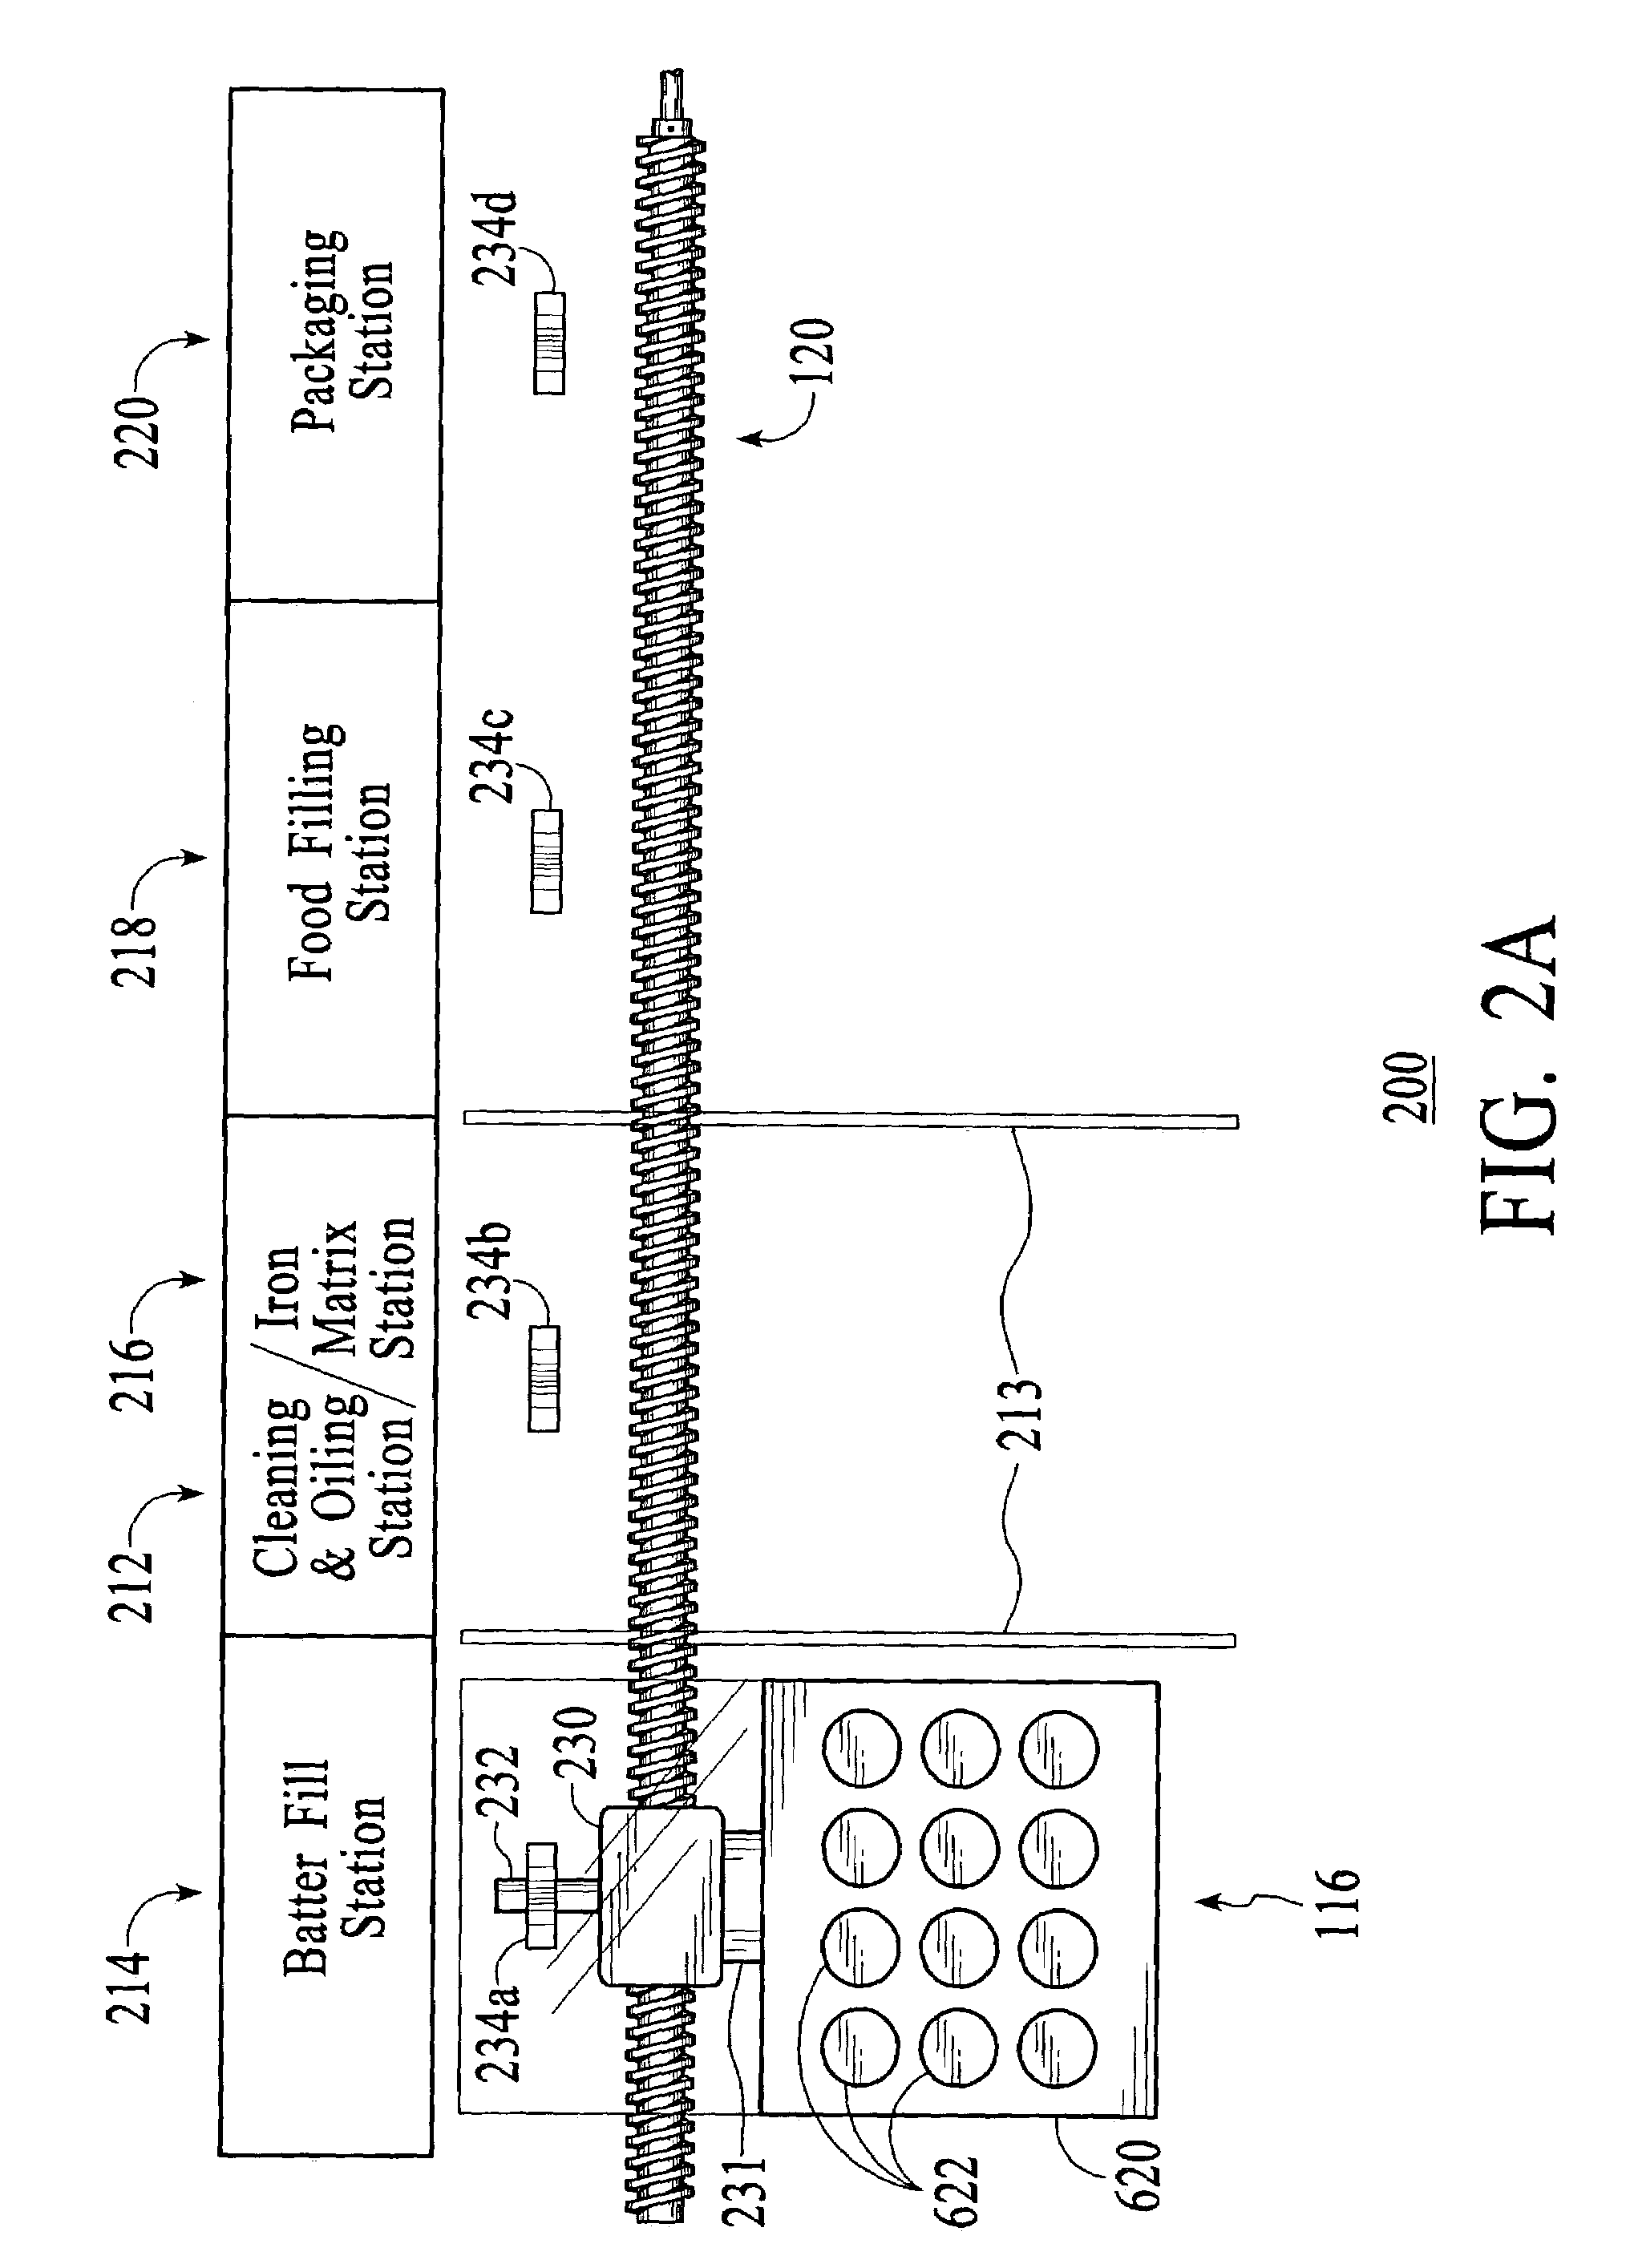 Method and apparatus for making a hand held food product